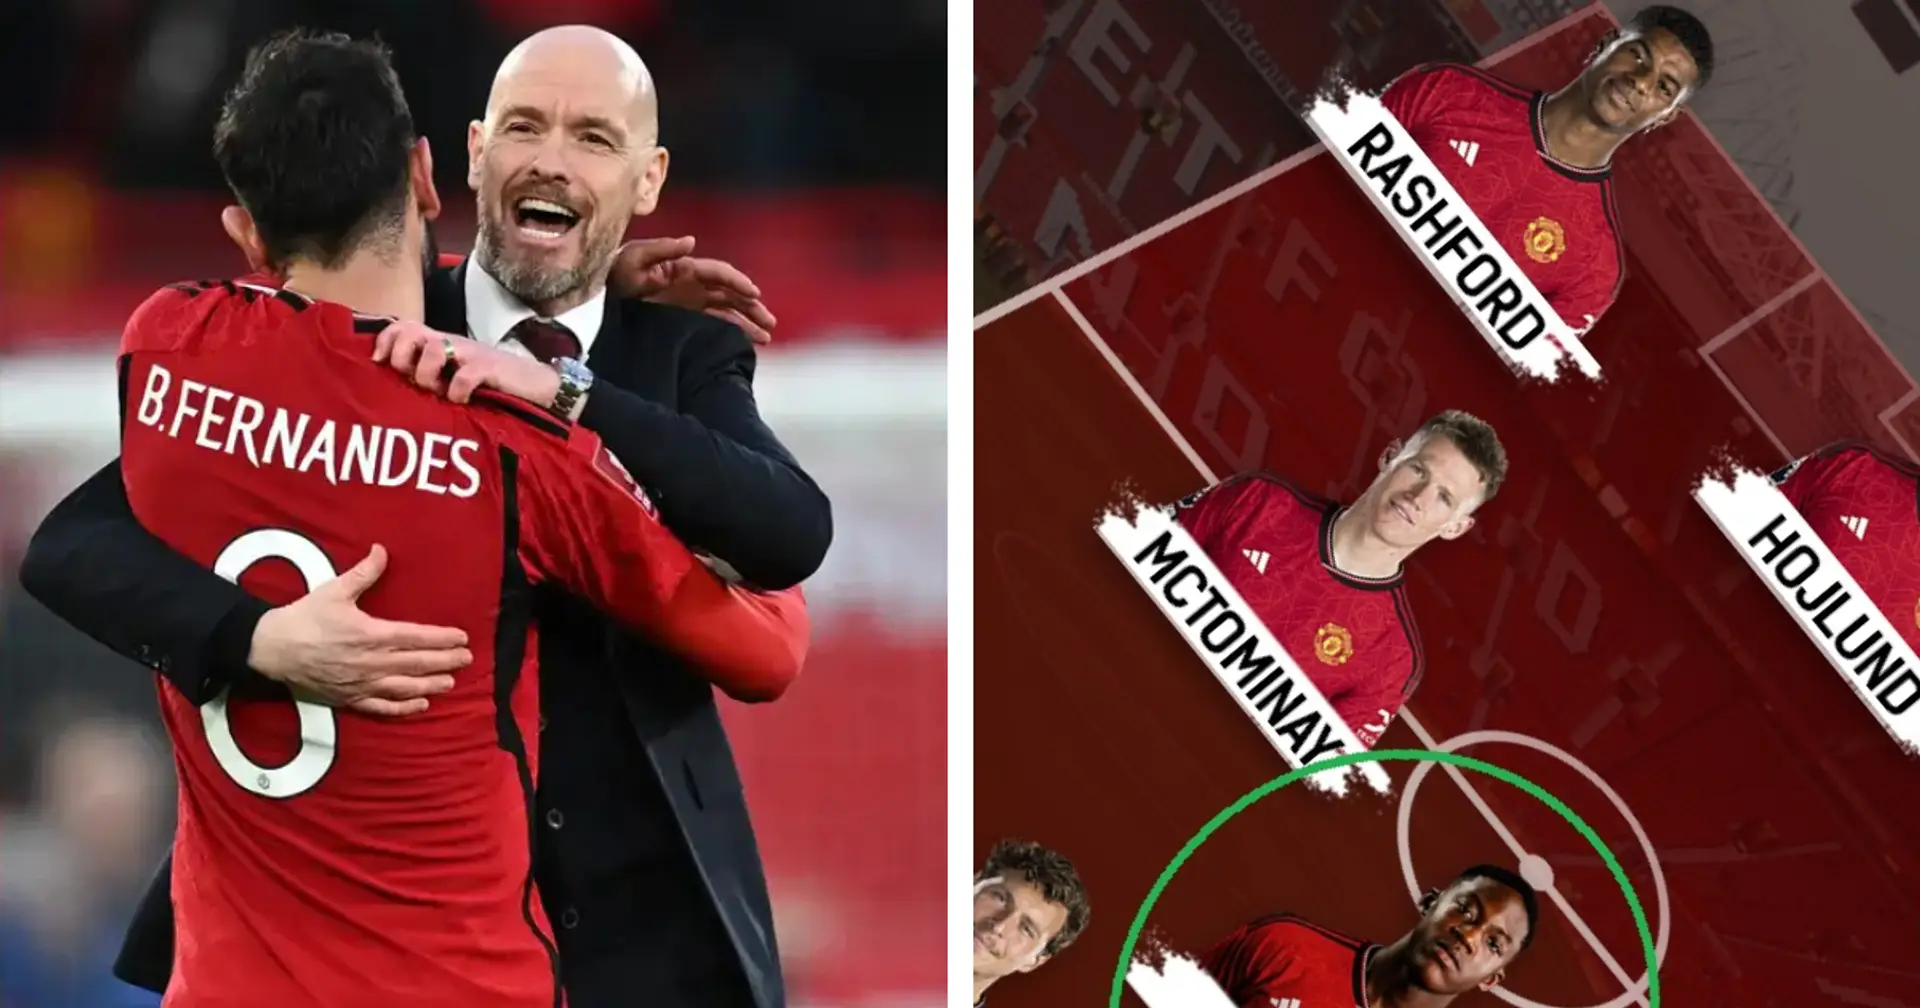 Man United's biggest strength from Liverpool — shown in lineup